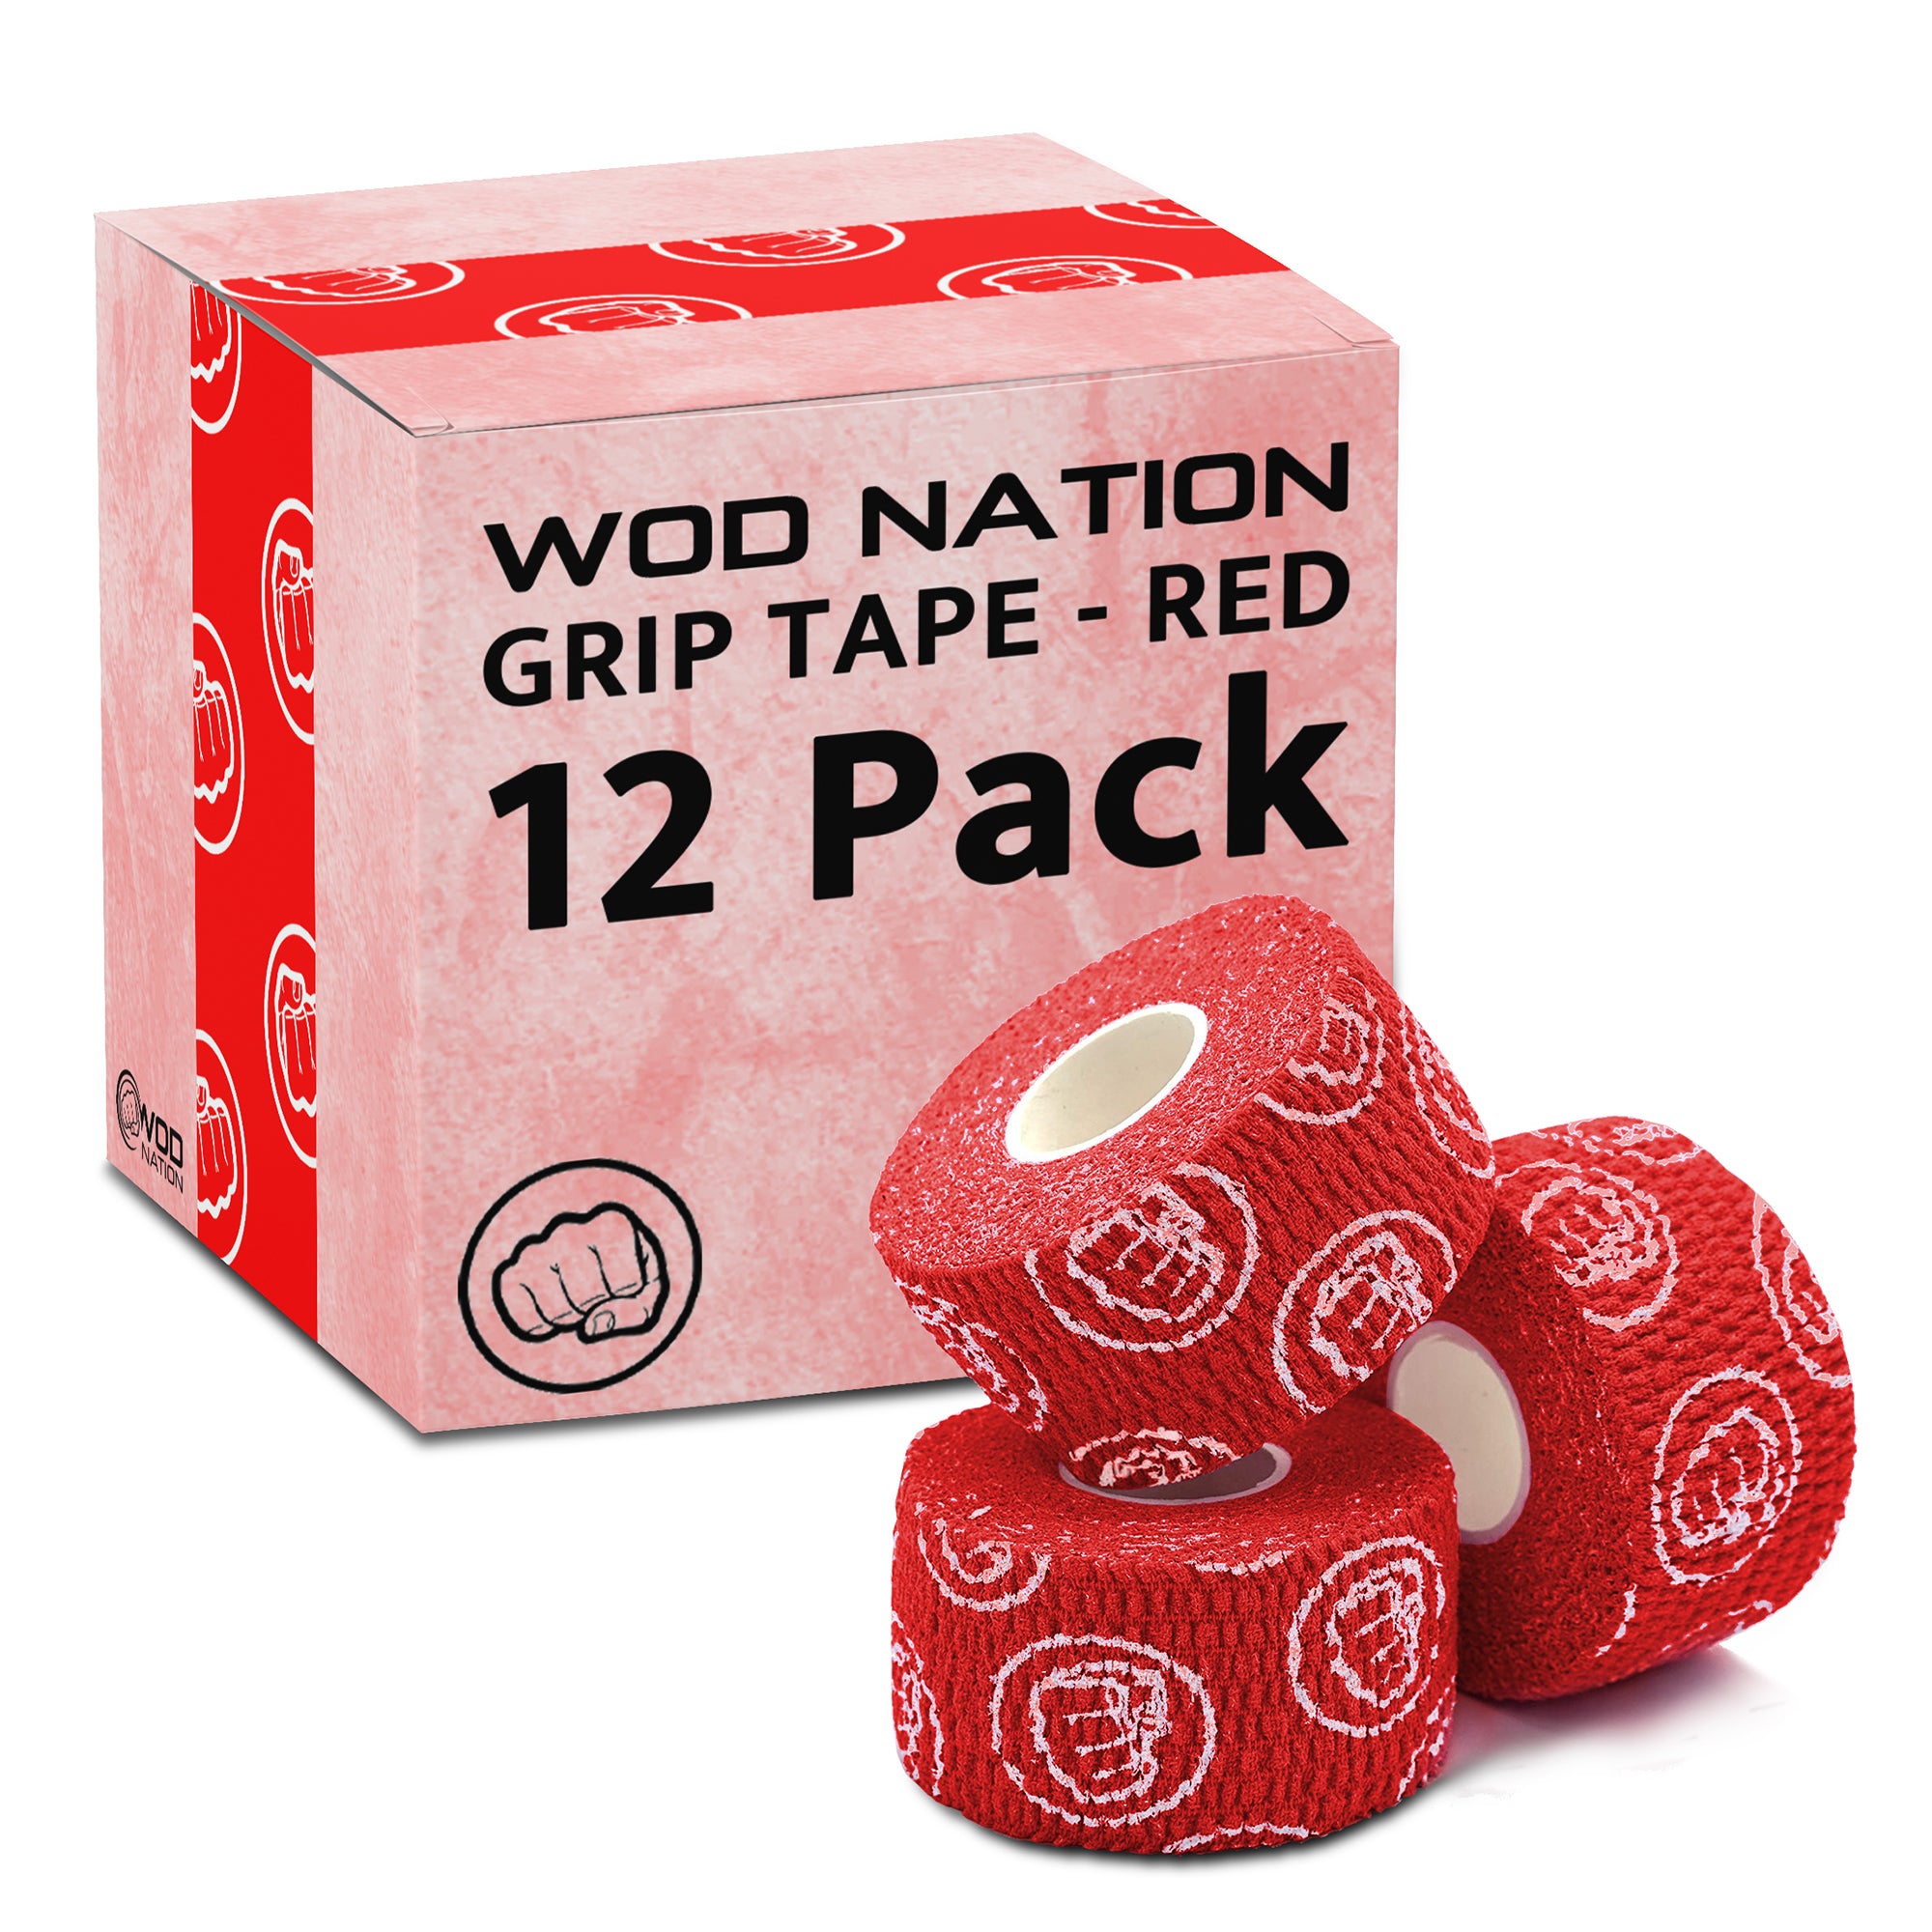 Adhesive Weightlifting Tape - Red